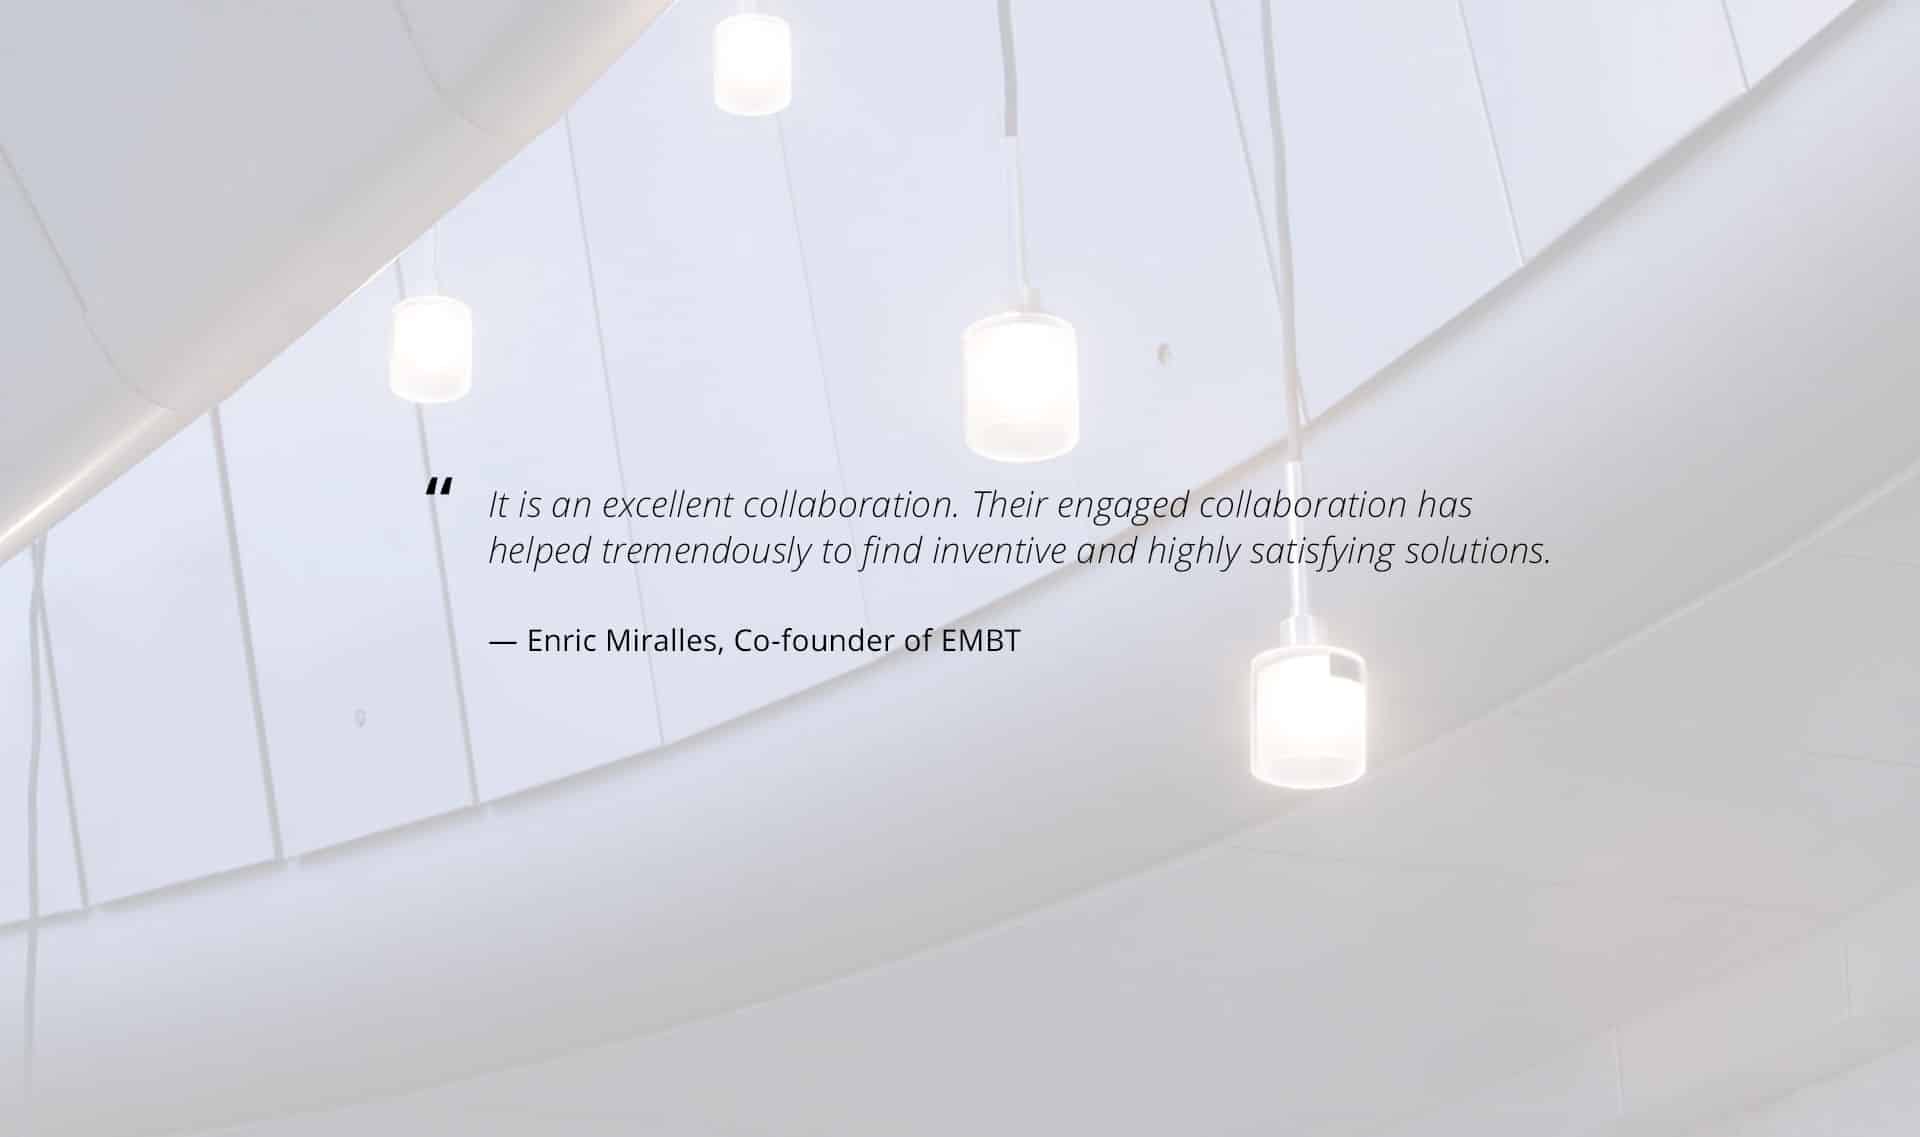 Testimonial about OVI from Enric Miralles, Co-Founder of EMBT